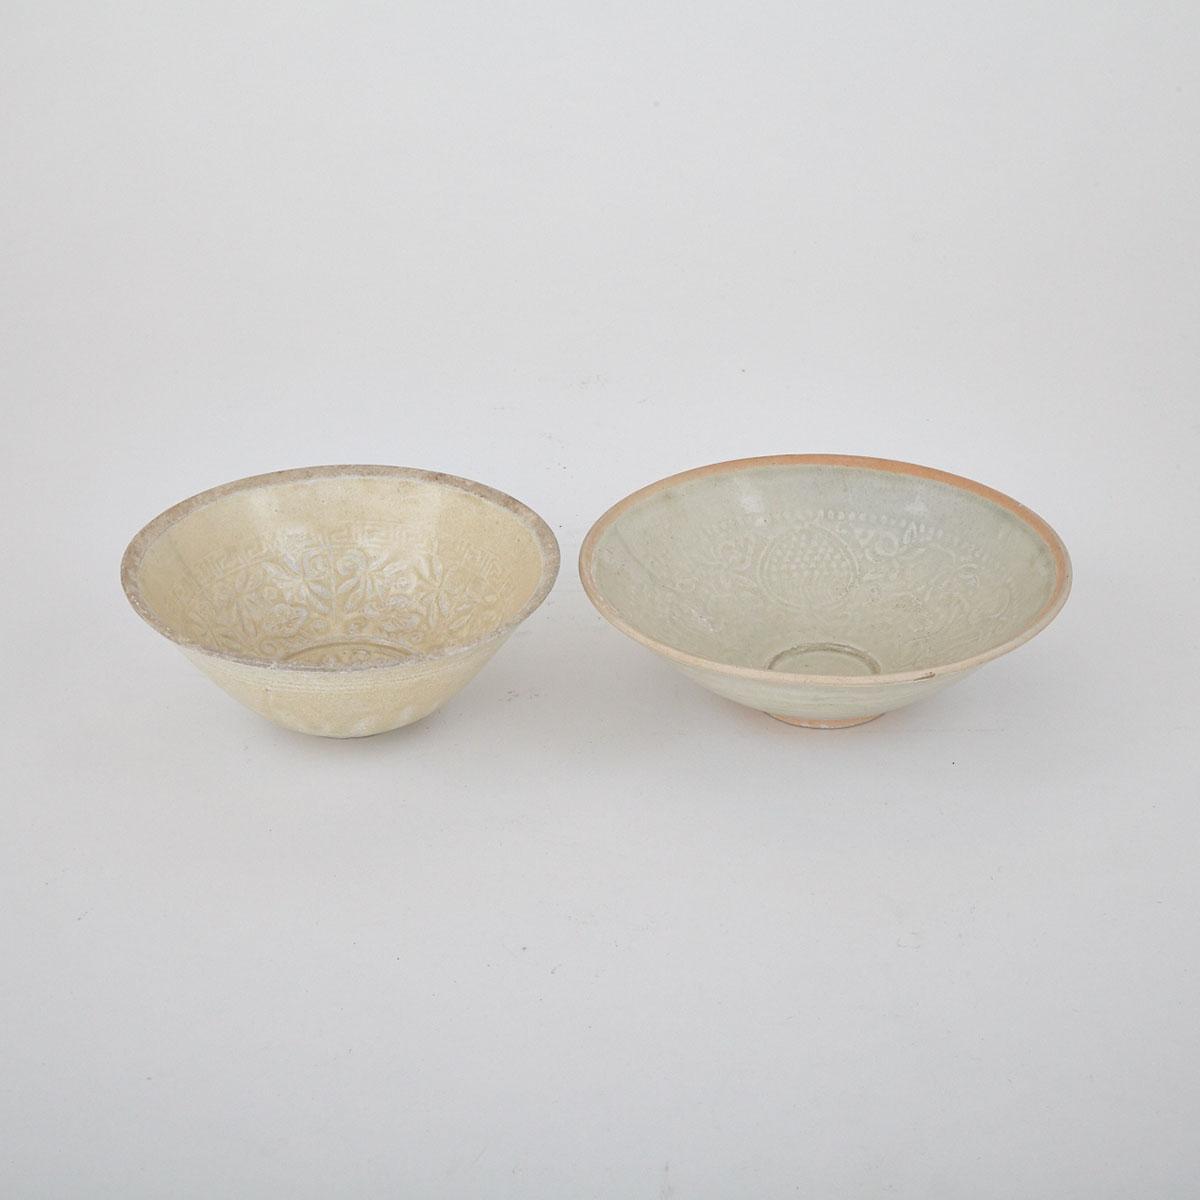 Two White Glazed Moulded  Bowls, South East Asia, 16th/17th Century